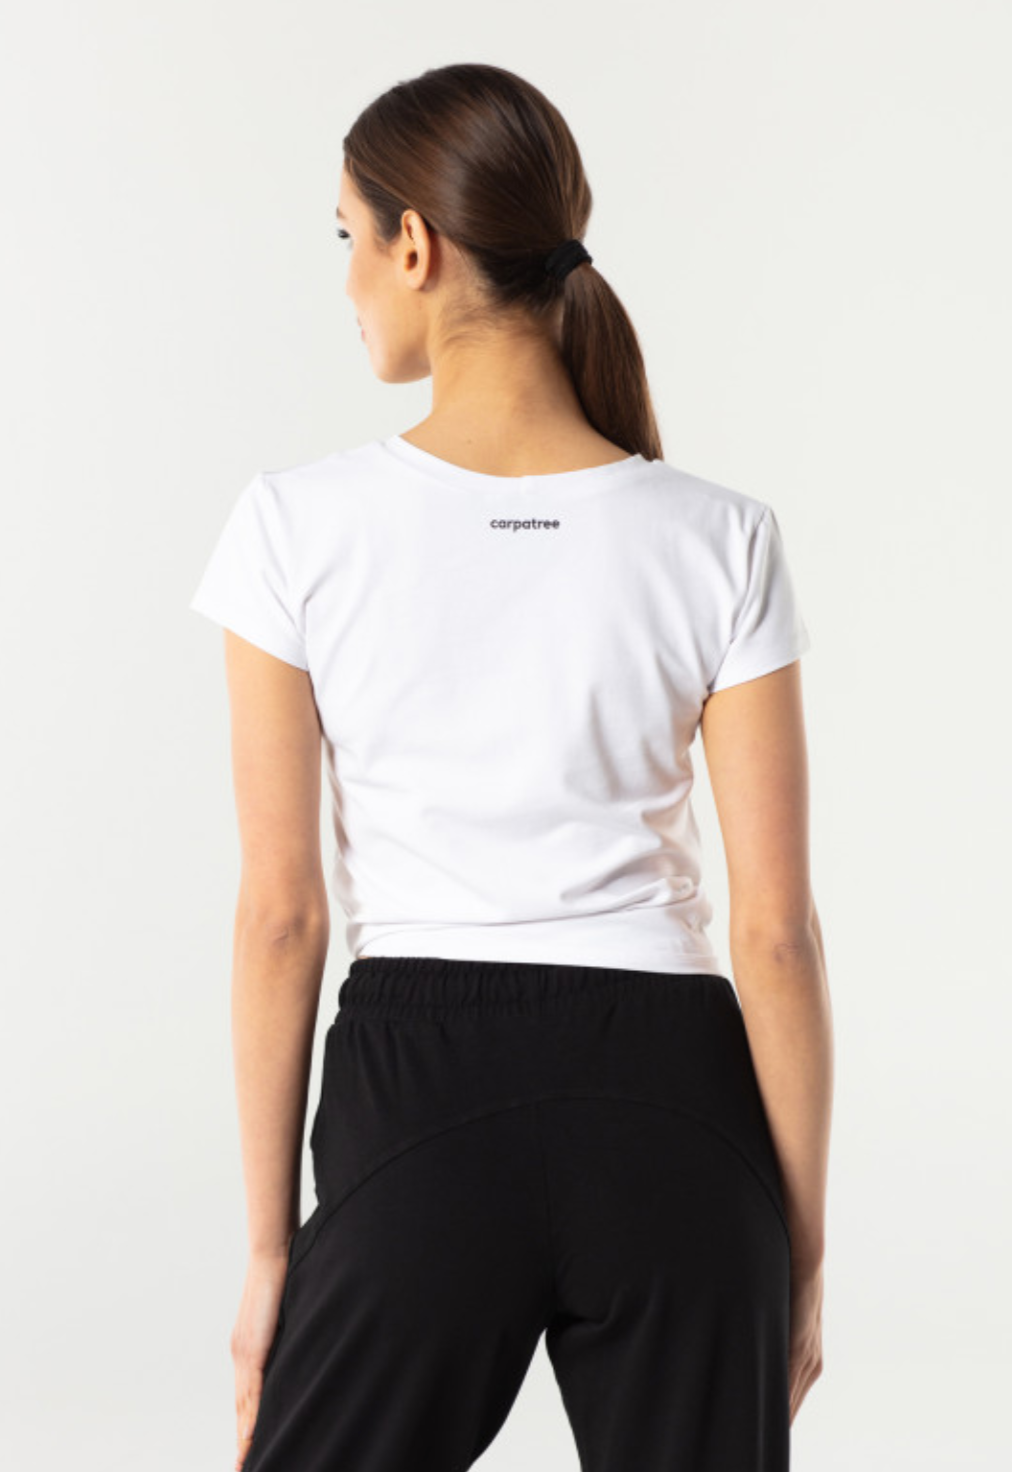 Carpatree Side T-Shirt - Short white sports t-shirt with a side tie knot. Made of soft and cool polyester fabric.